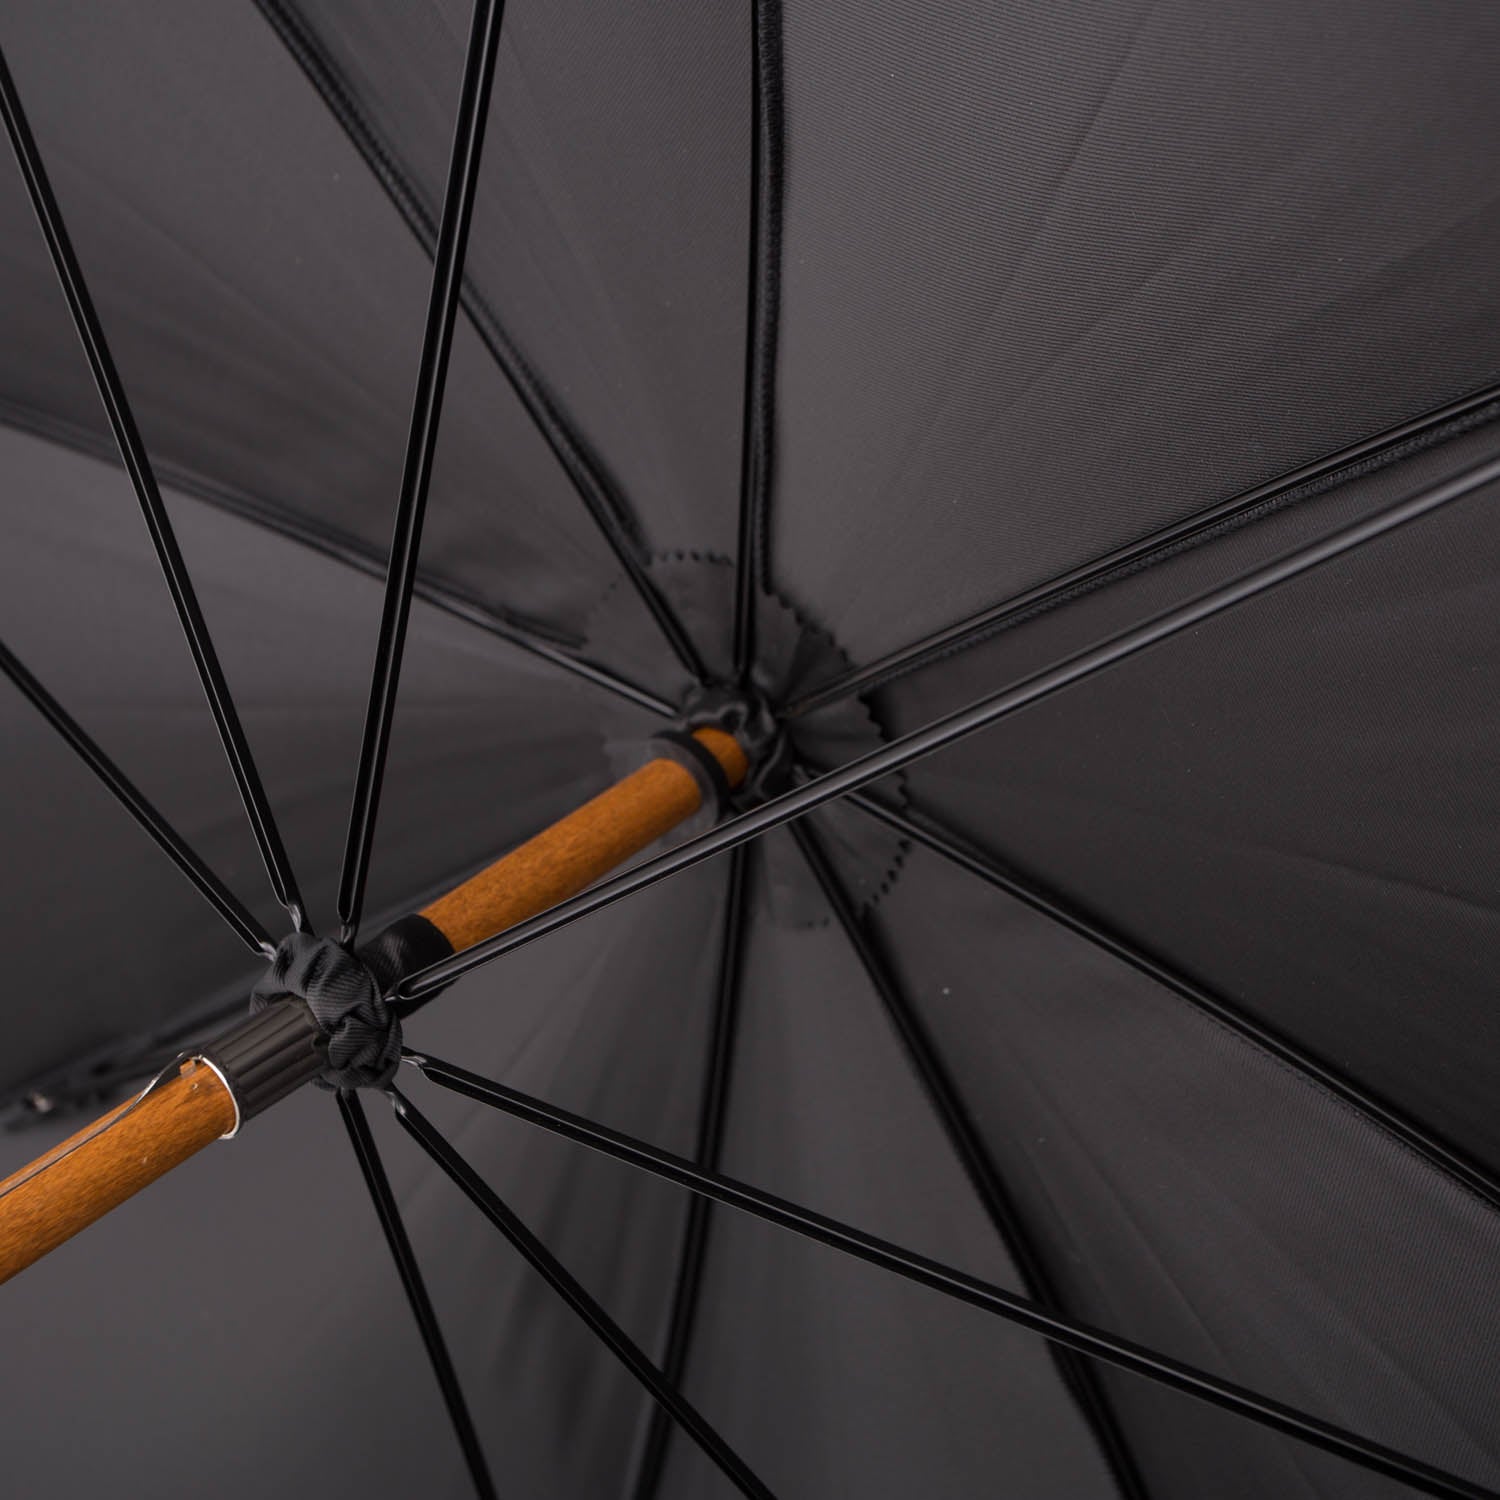 A Black Doorman Umbrella with Chestnut Handle providing rain protection with a black canopy, manufactured by KirbyAllison.com.